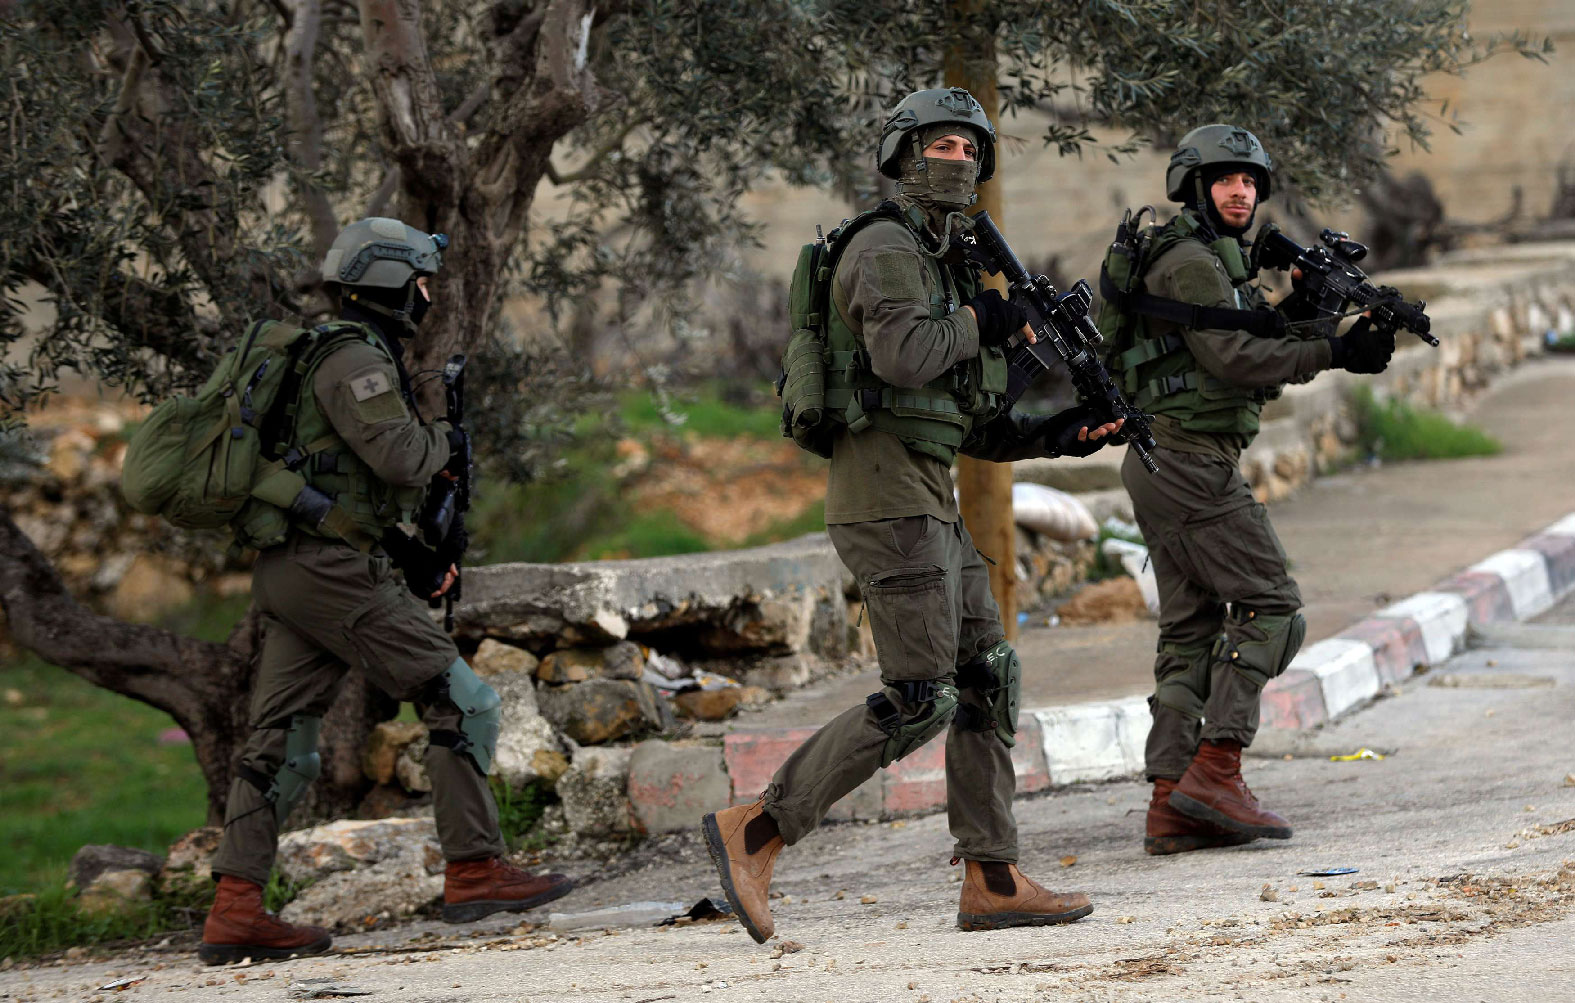  Israeli forces walk during a raid in Ramallah in the Israeli-occupied West Bank December 13, 2018.